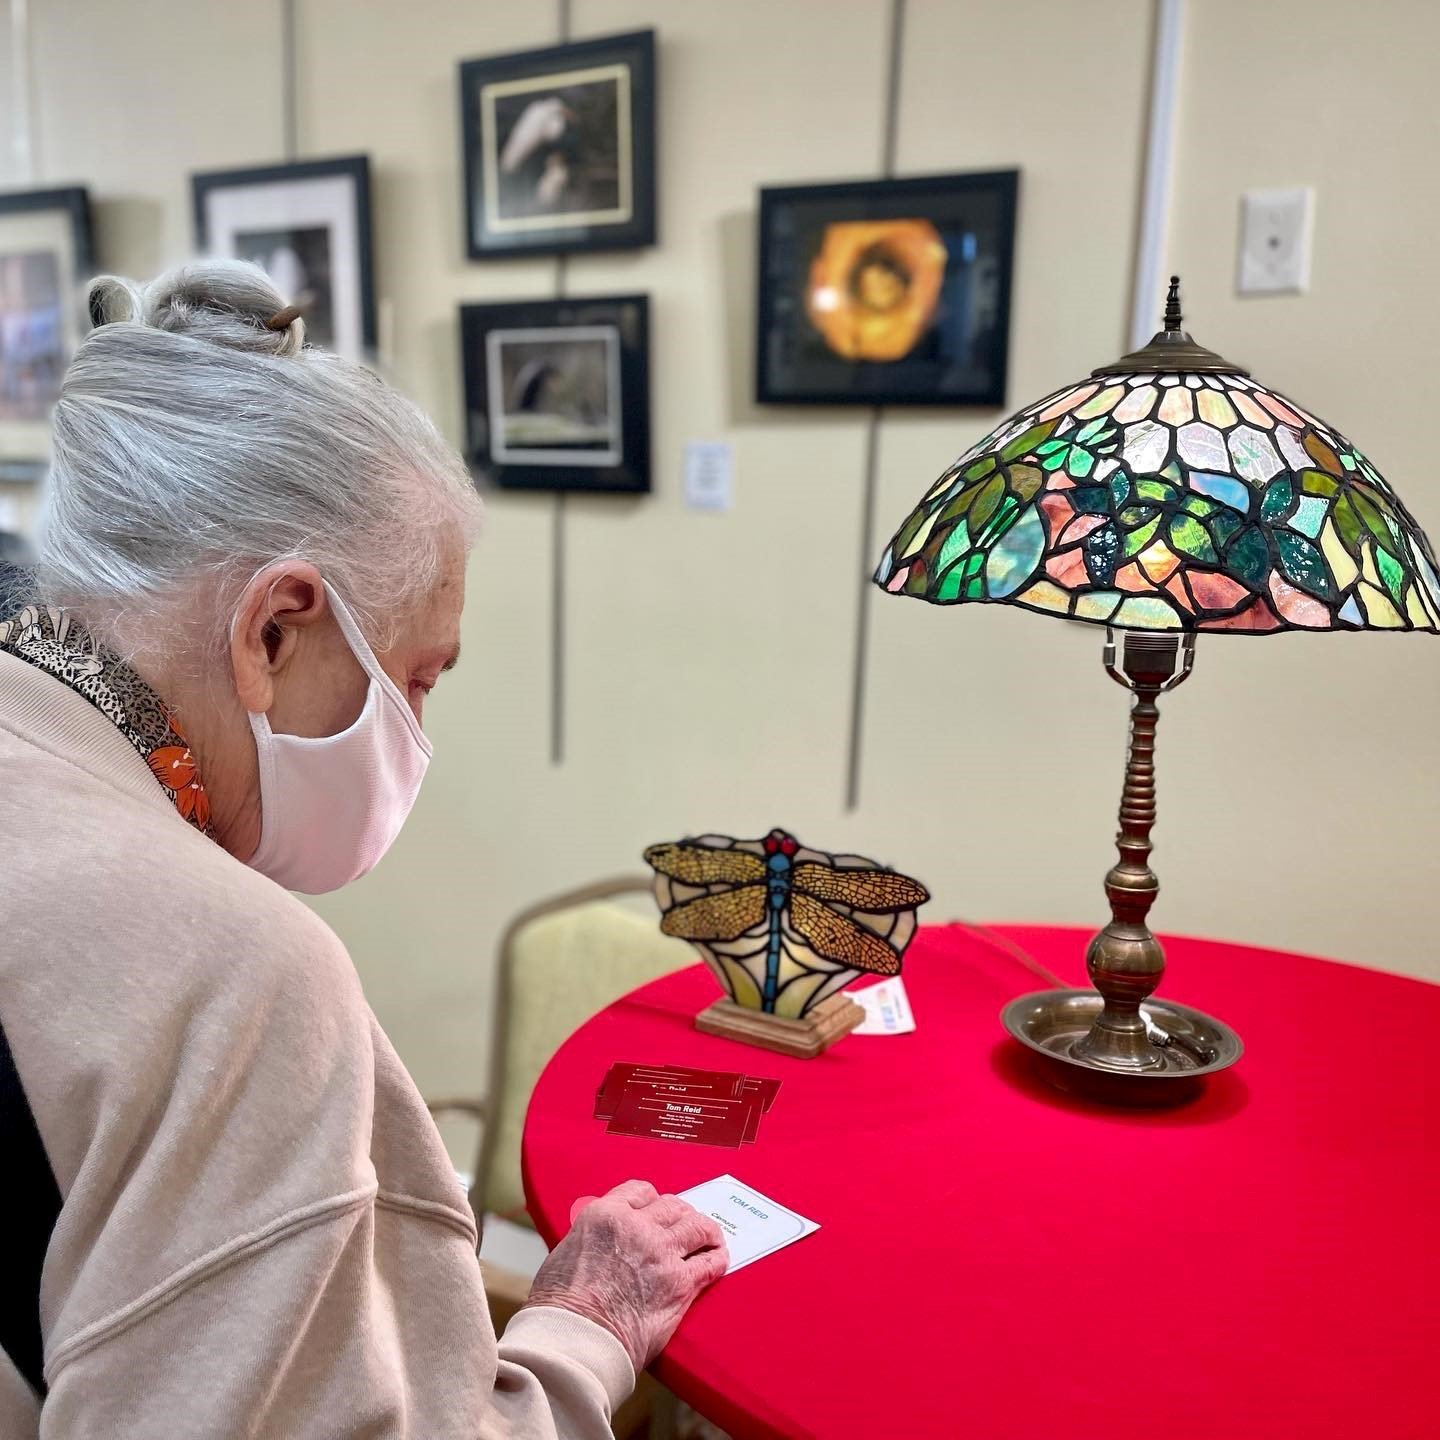 Tom Reid’s colored-glass lampshade and dragonfly were popular with visitors to Cypress Village’s Visual Arts Show.